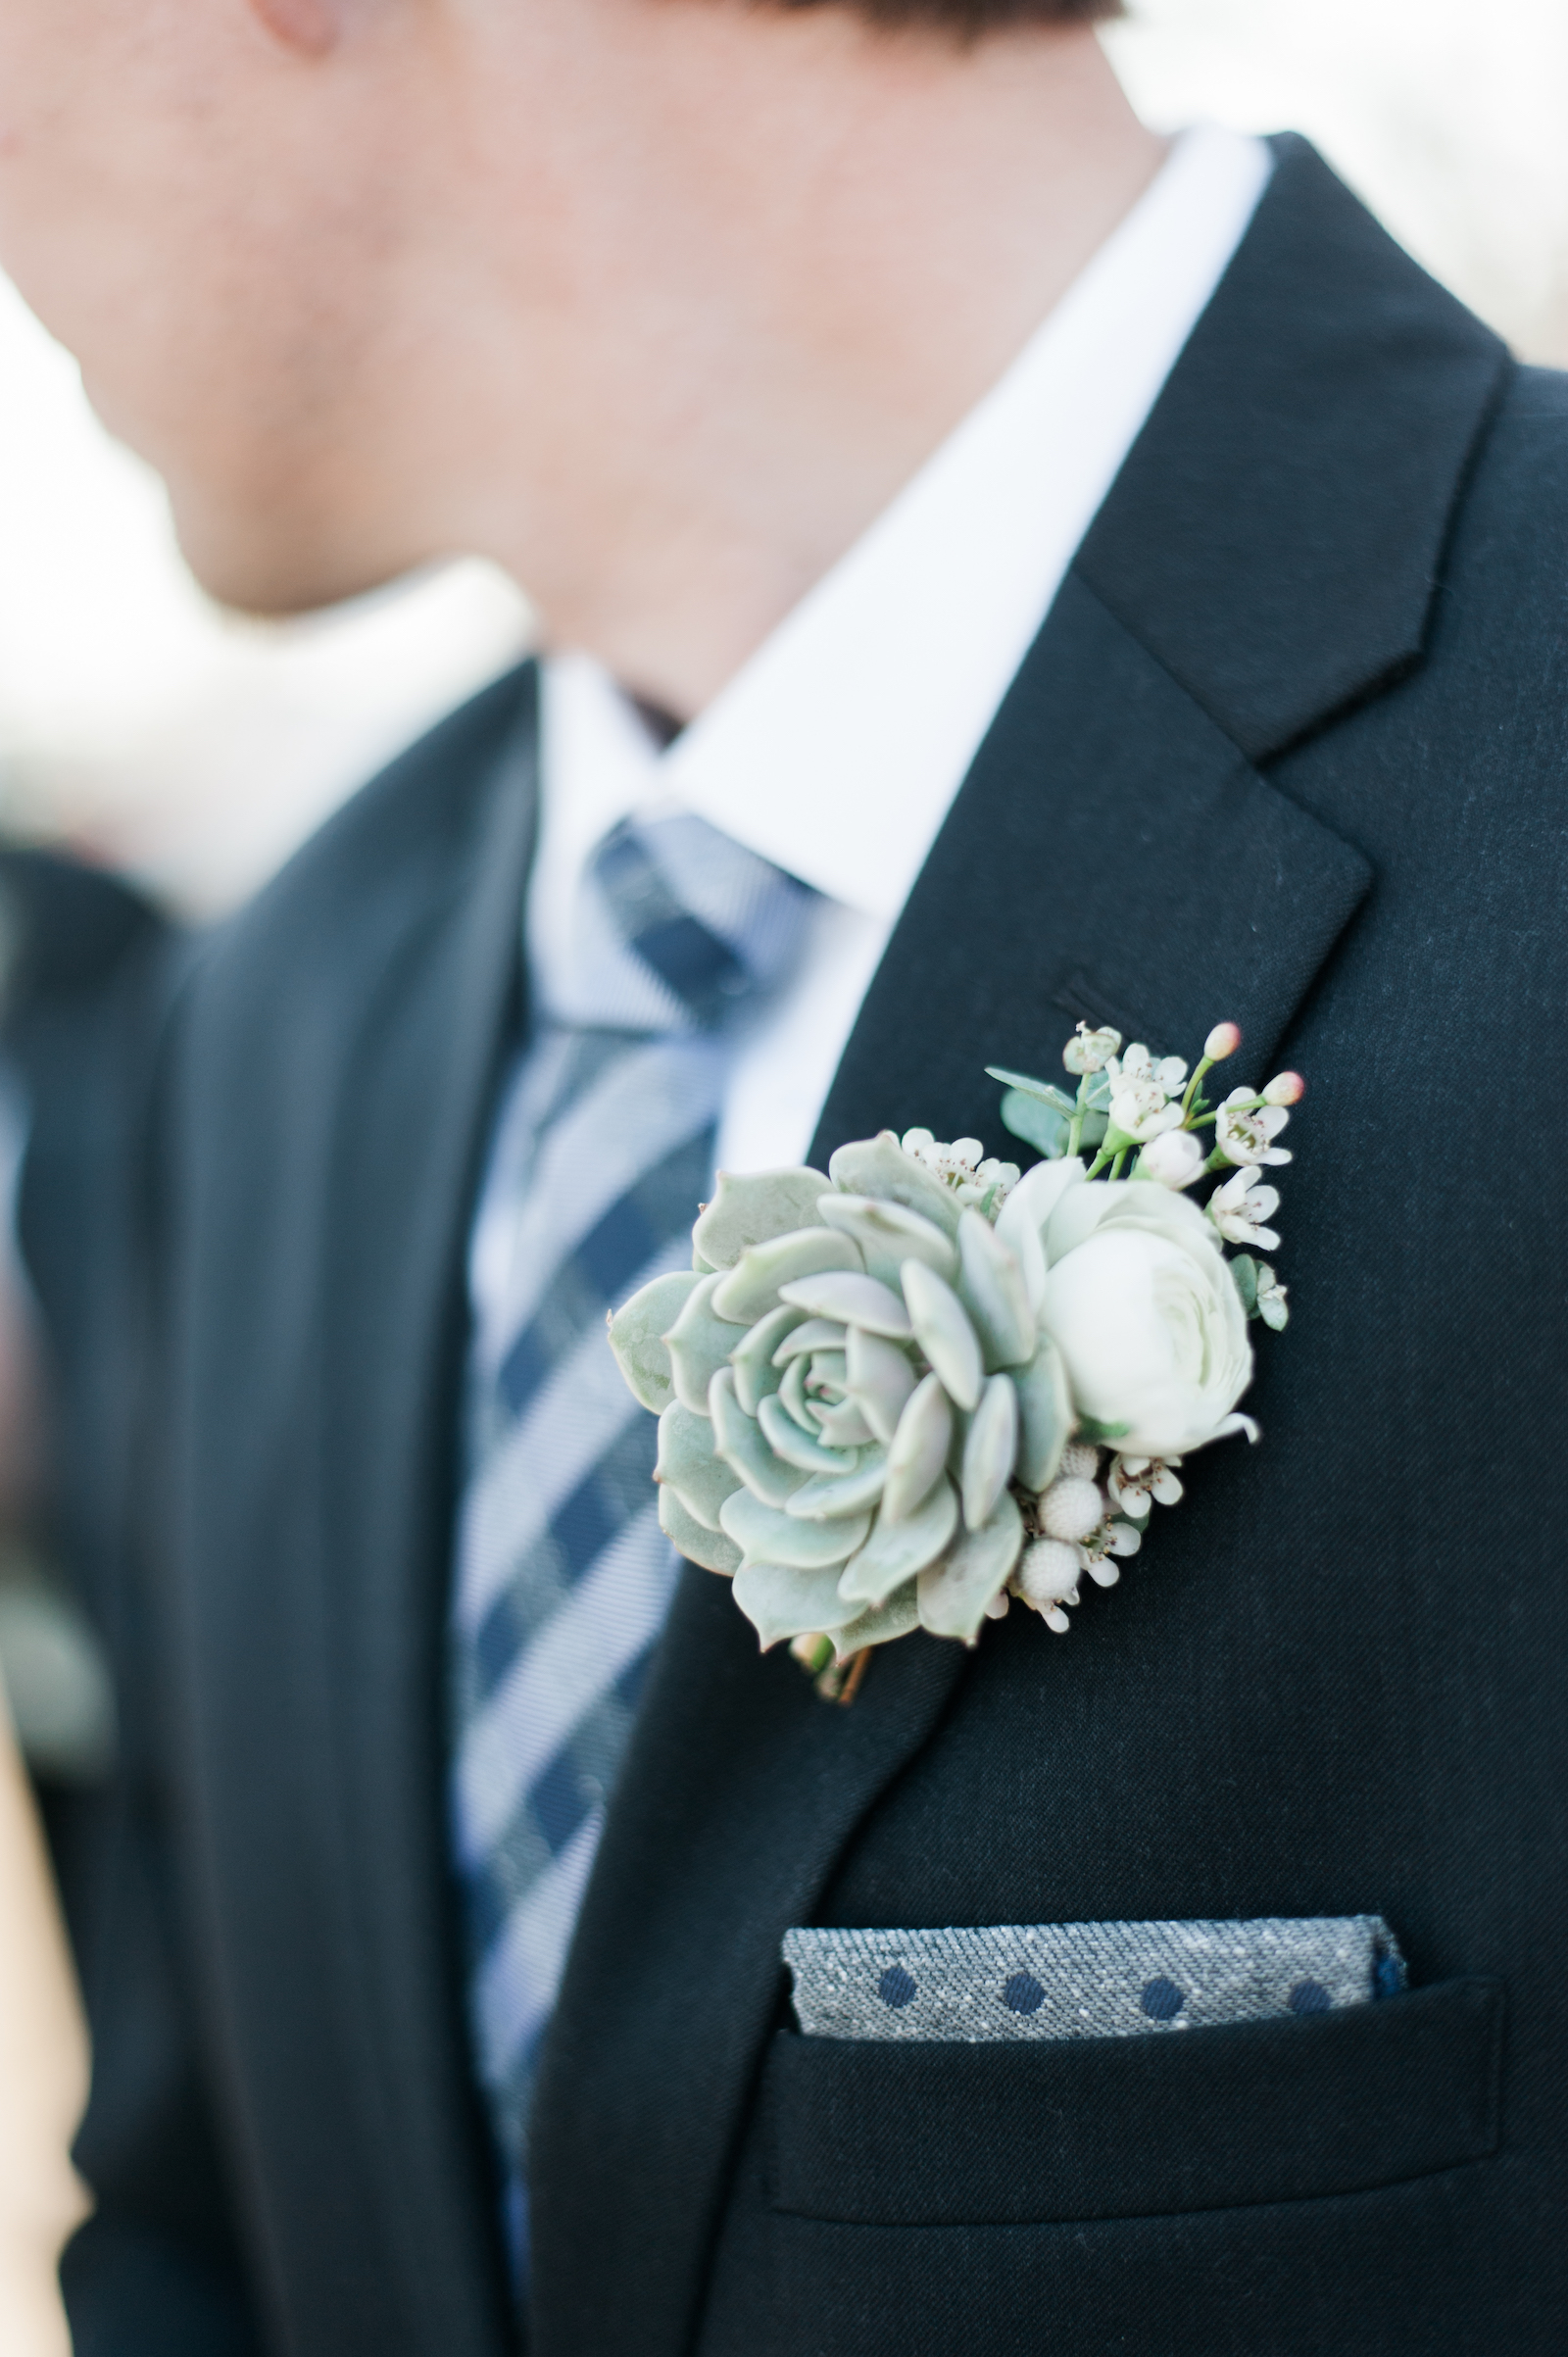 Groom's winter boutonniere with succulent and white ranunculus